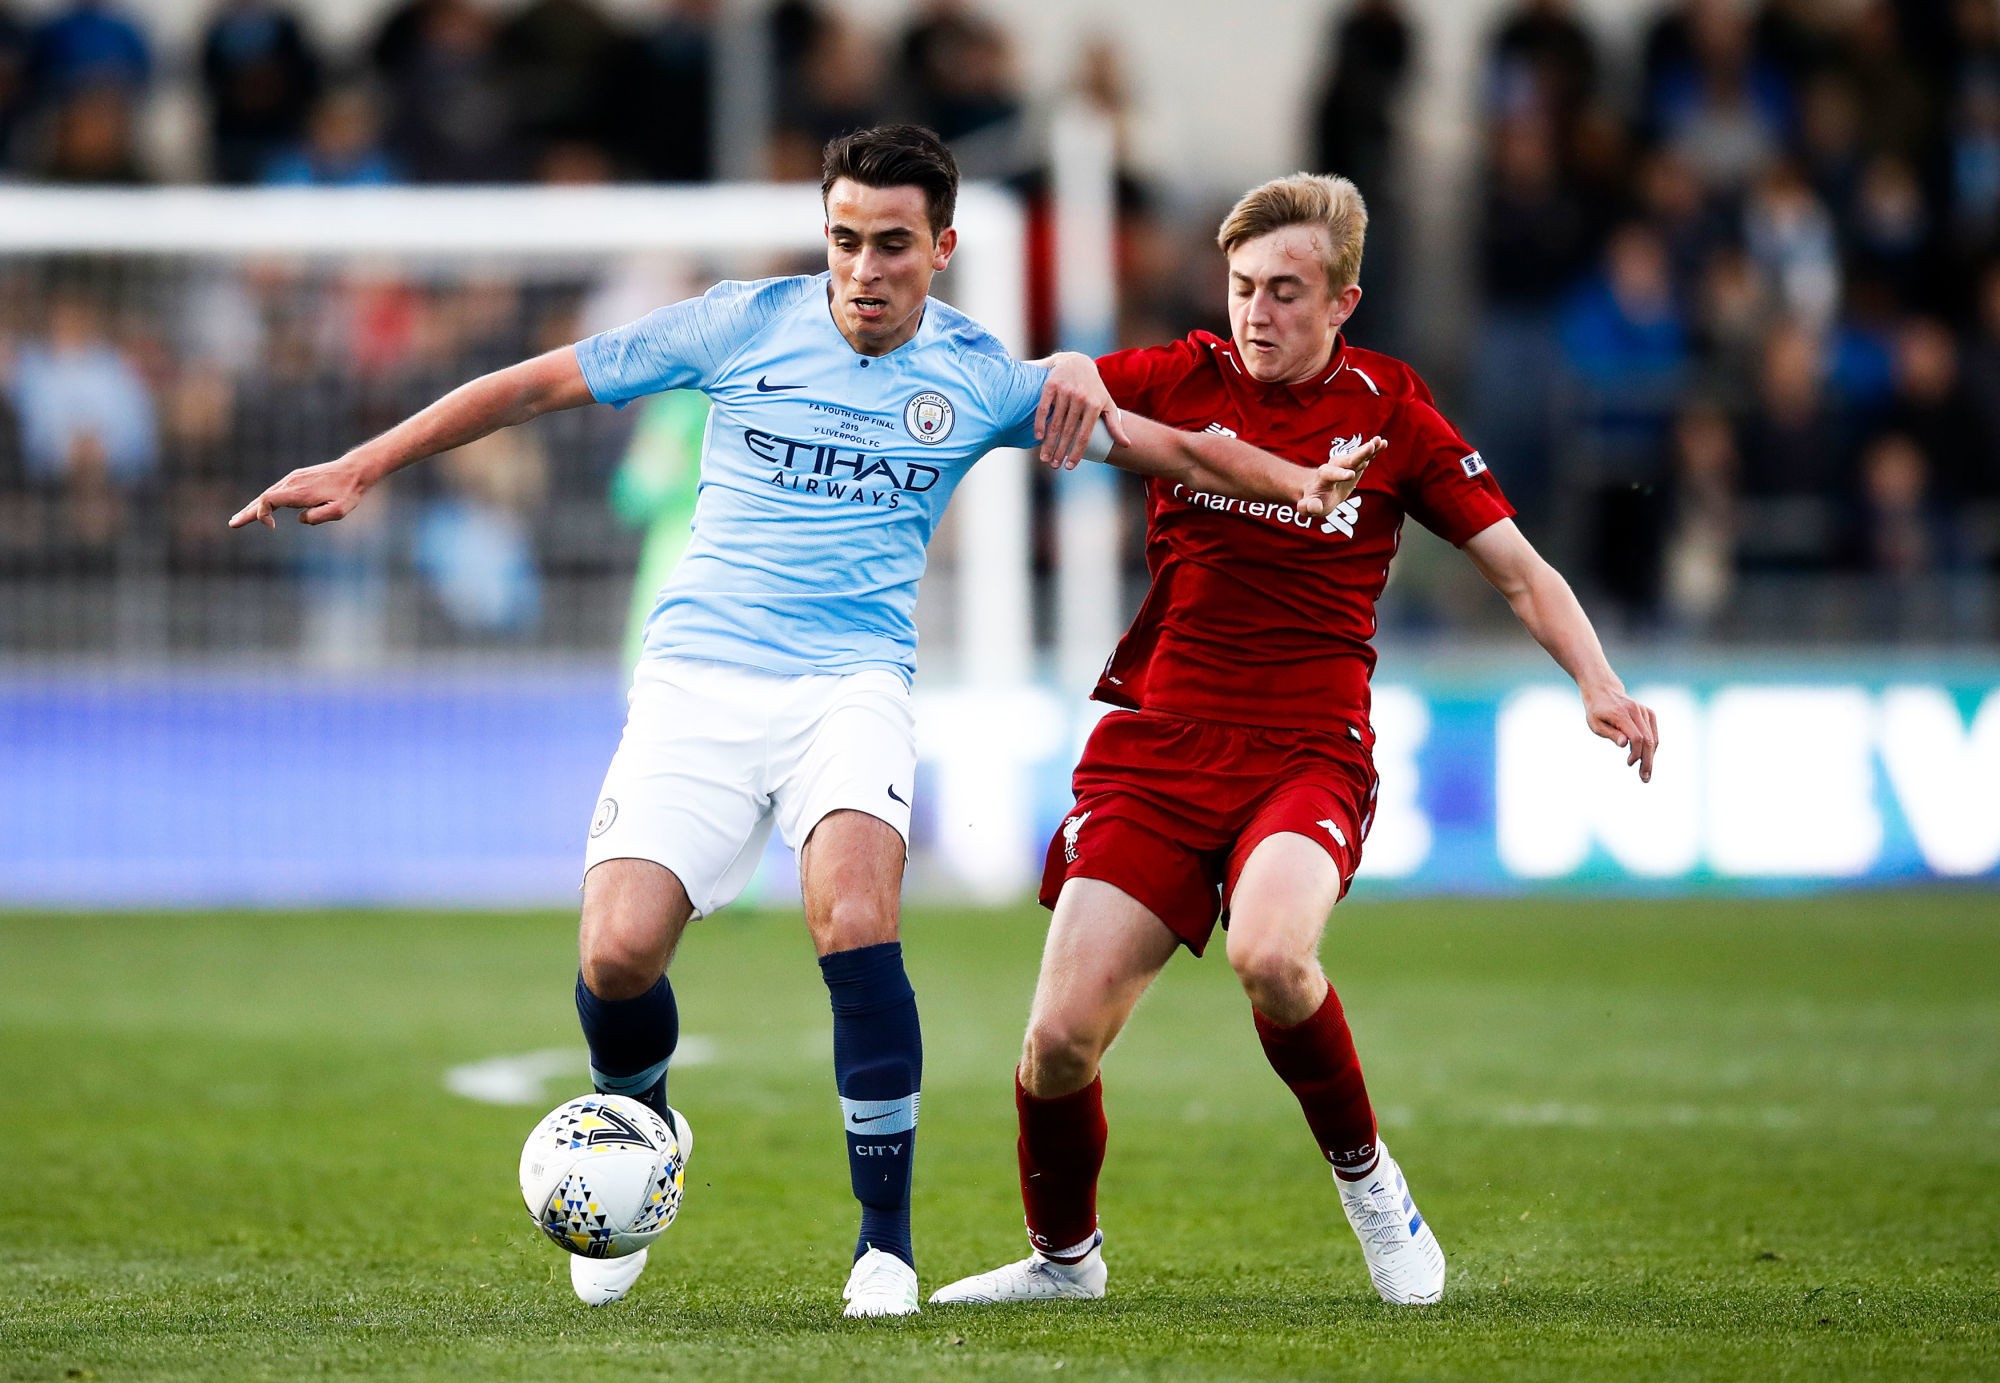 Manchester City's Eric Garcia (left) and Liverpool's Jake Cain battle for the ball during the FA Youth Cup final at The City Academy Stadium, Manchester. Photo : PA Images / Icon Sport